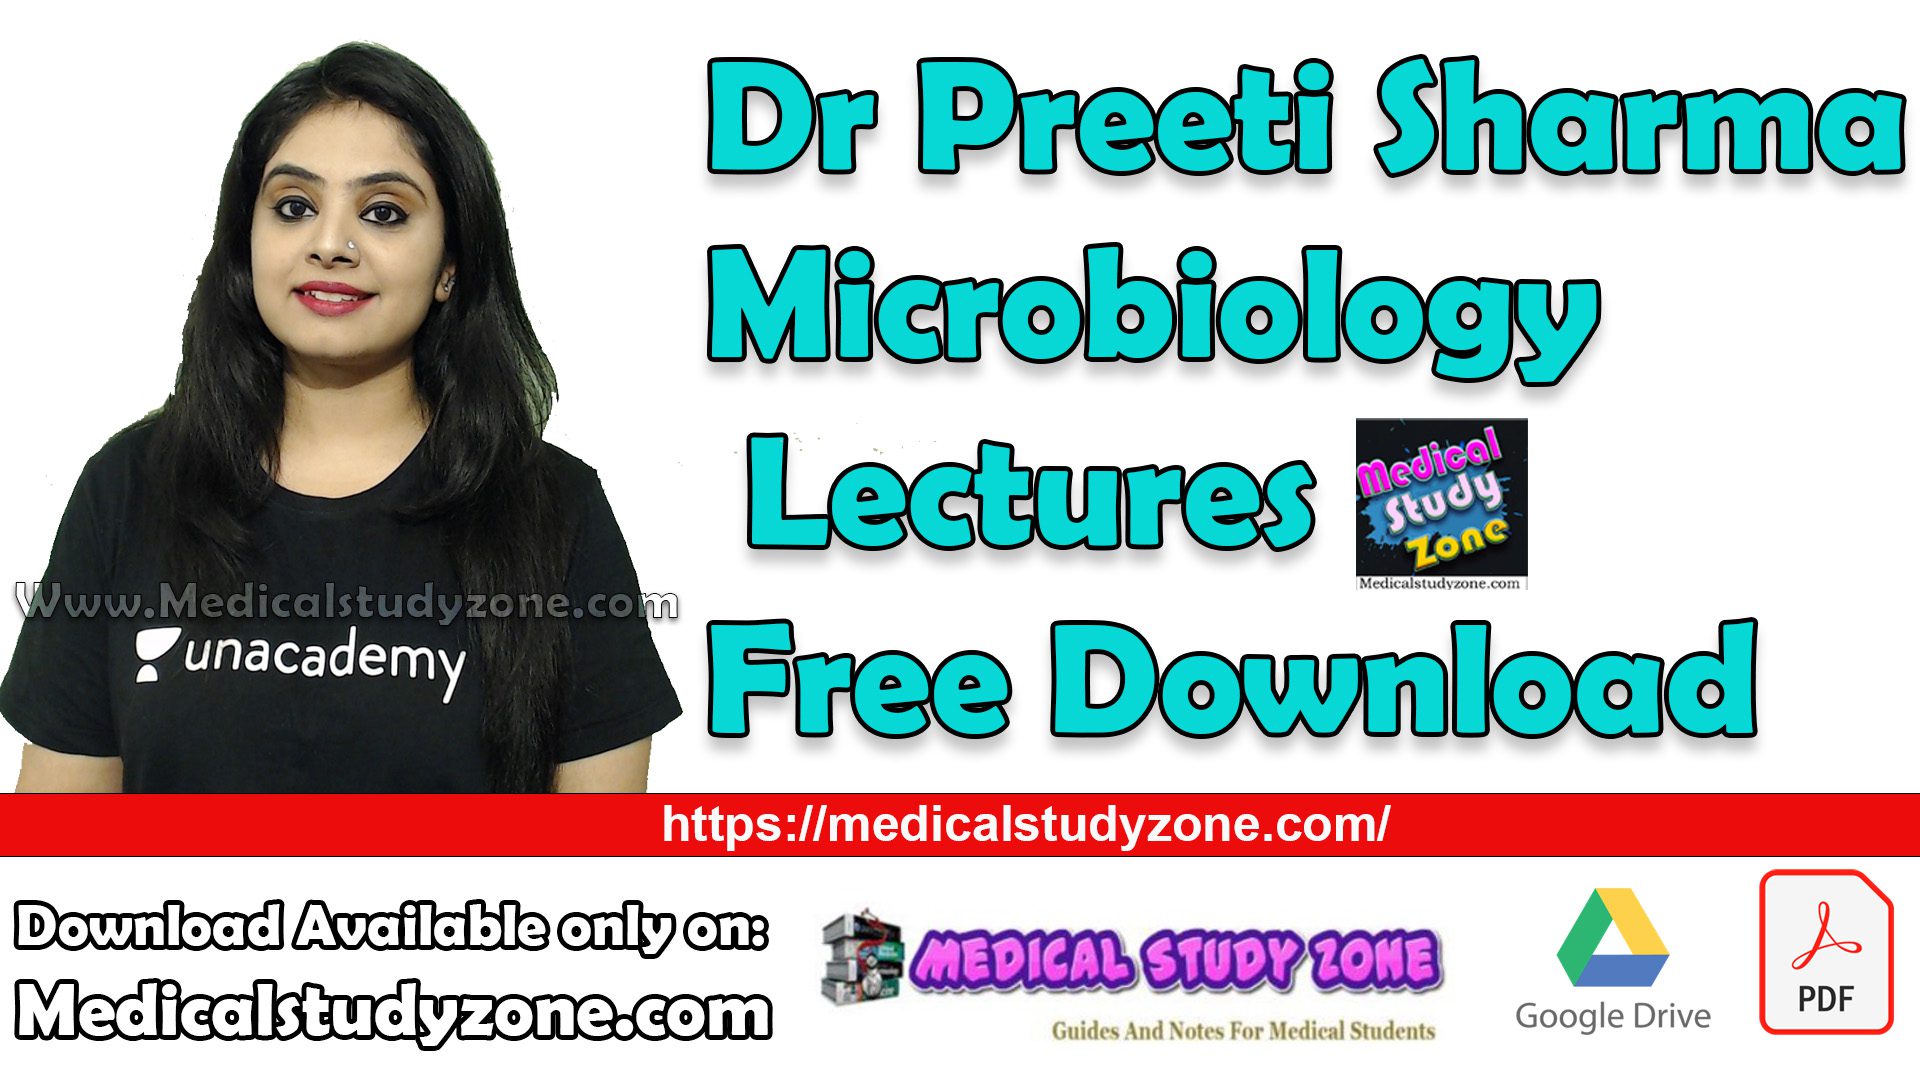 Dr Preeti Sharma Microbiology Lectures Free Download